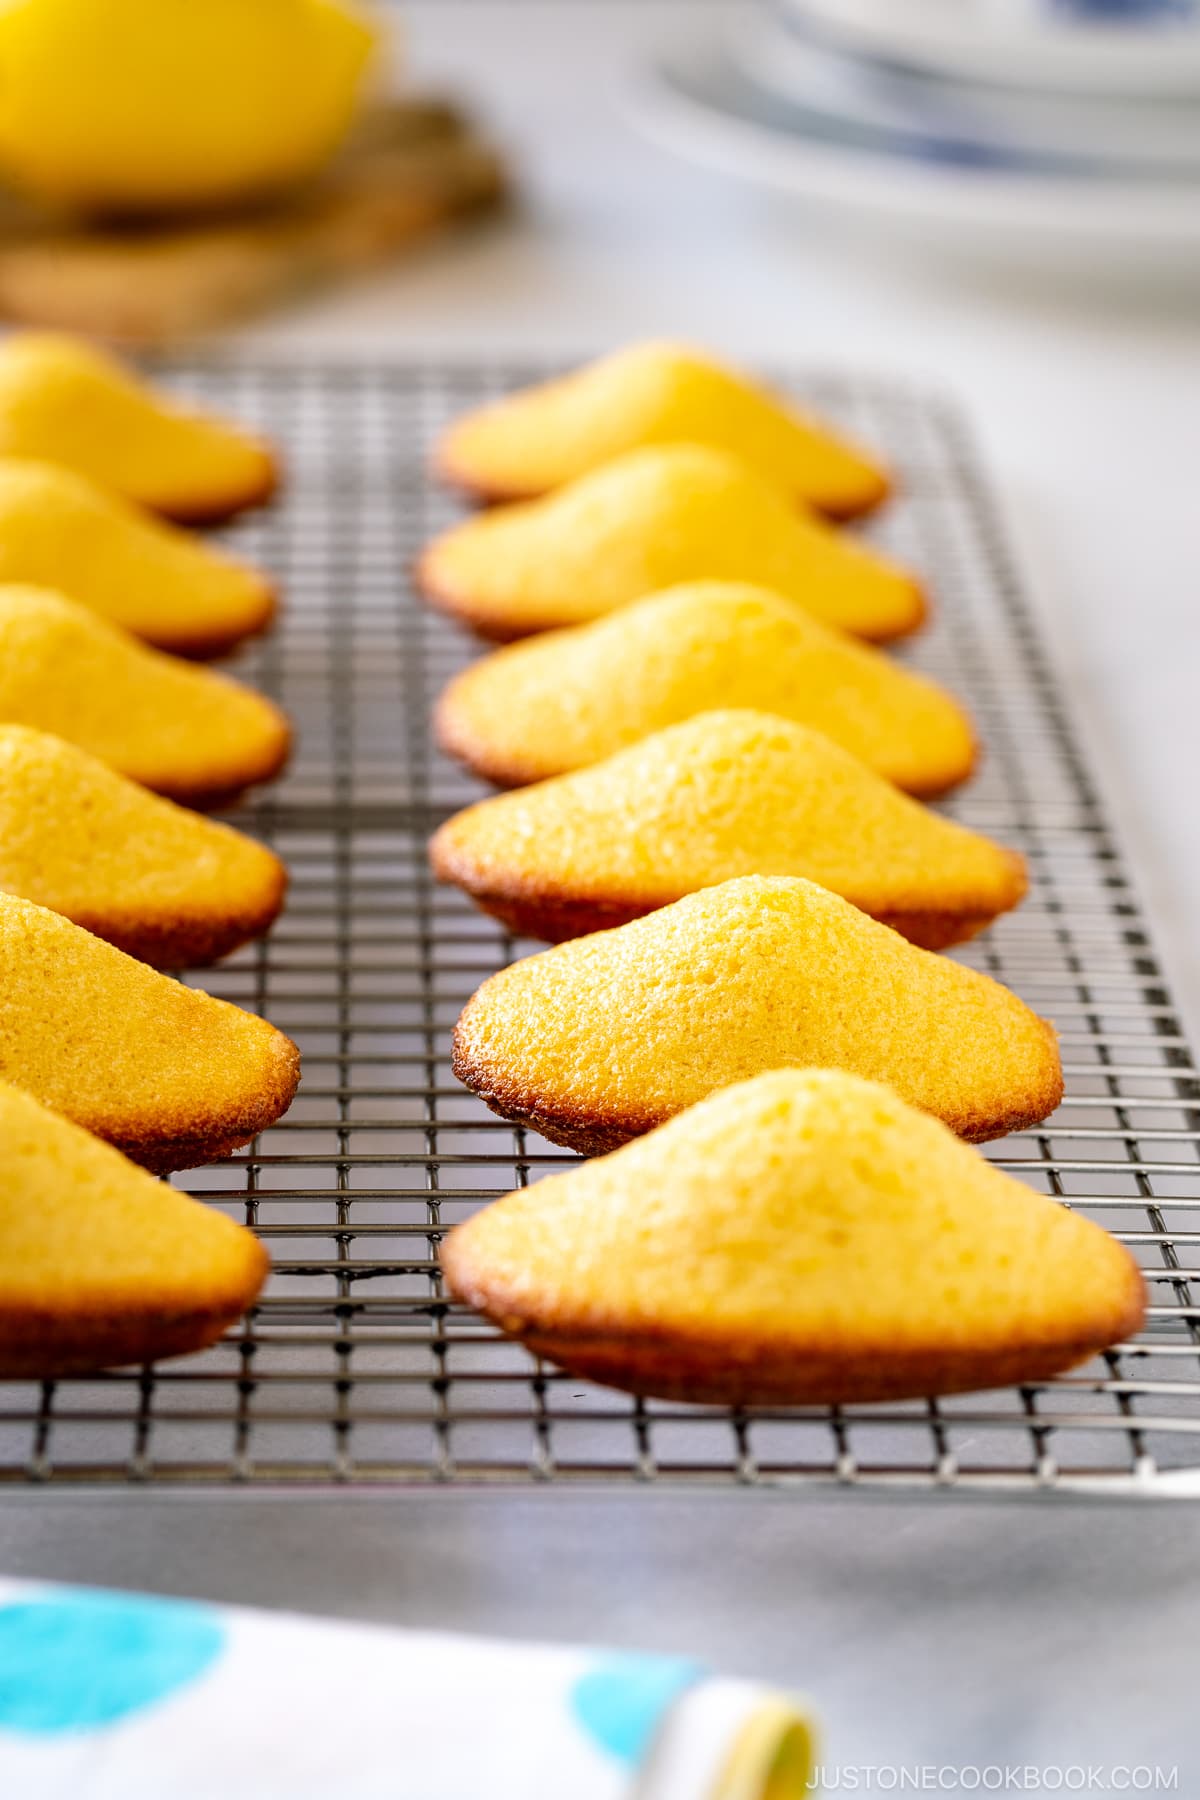 Freshly baked Madeleines are lined up on a wire rack.